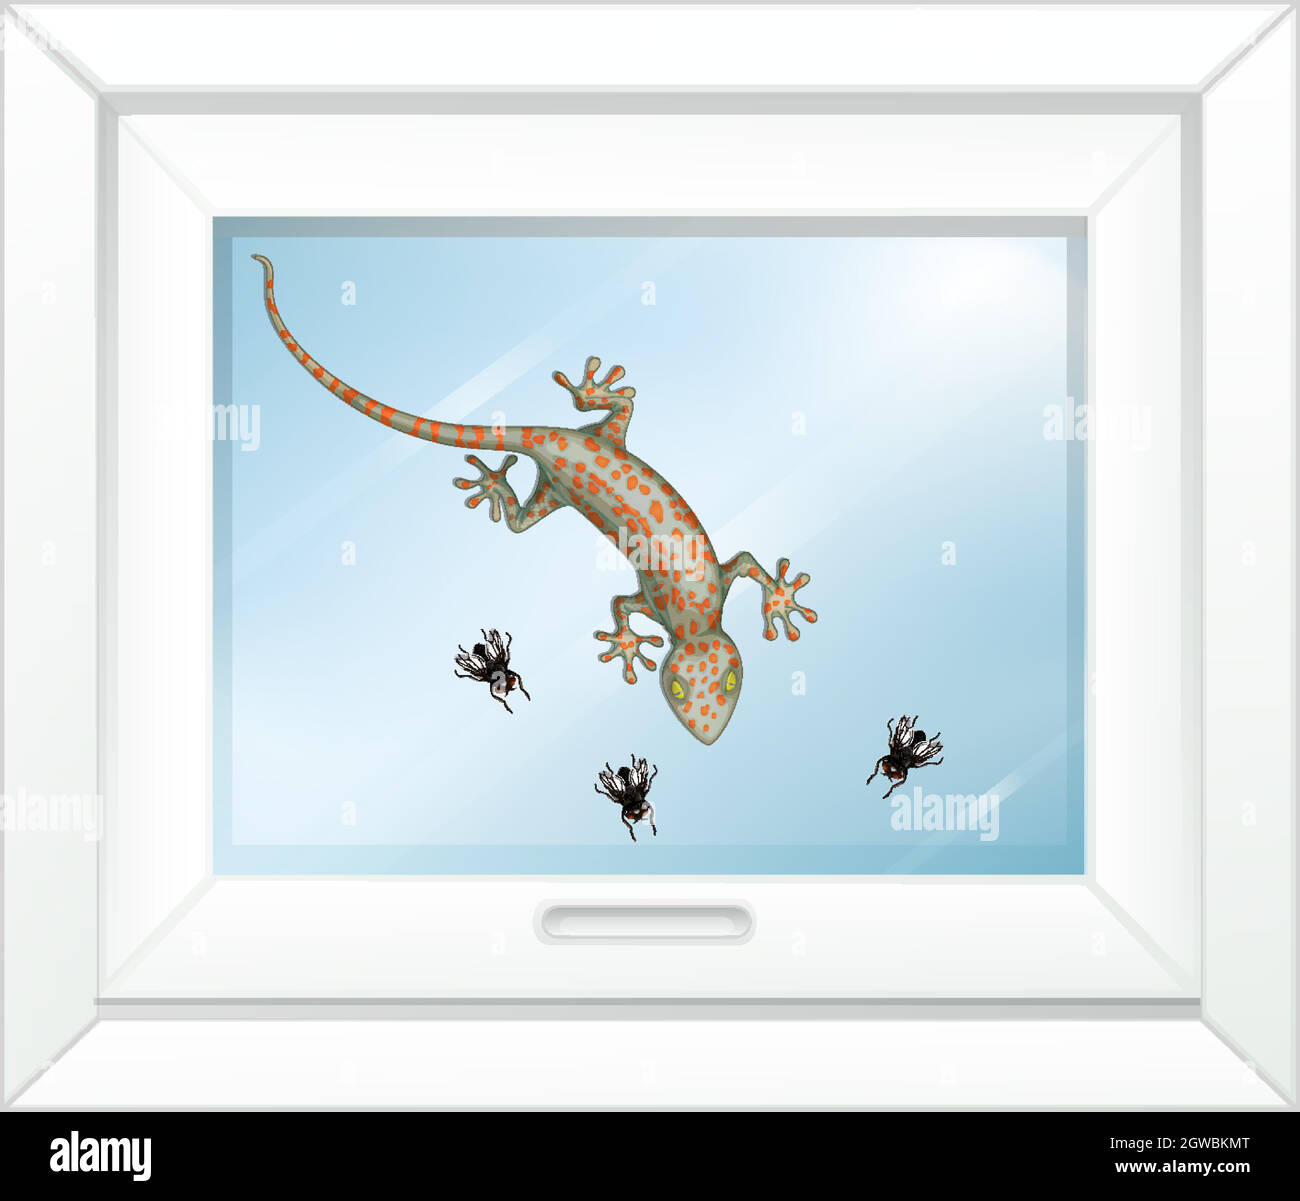 Gecko on glass window with many fly in cartoon style Stock Vector